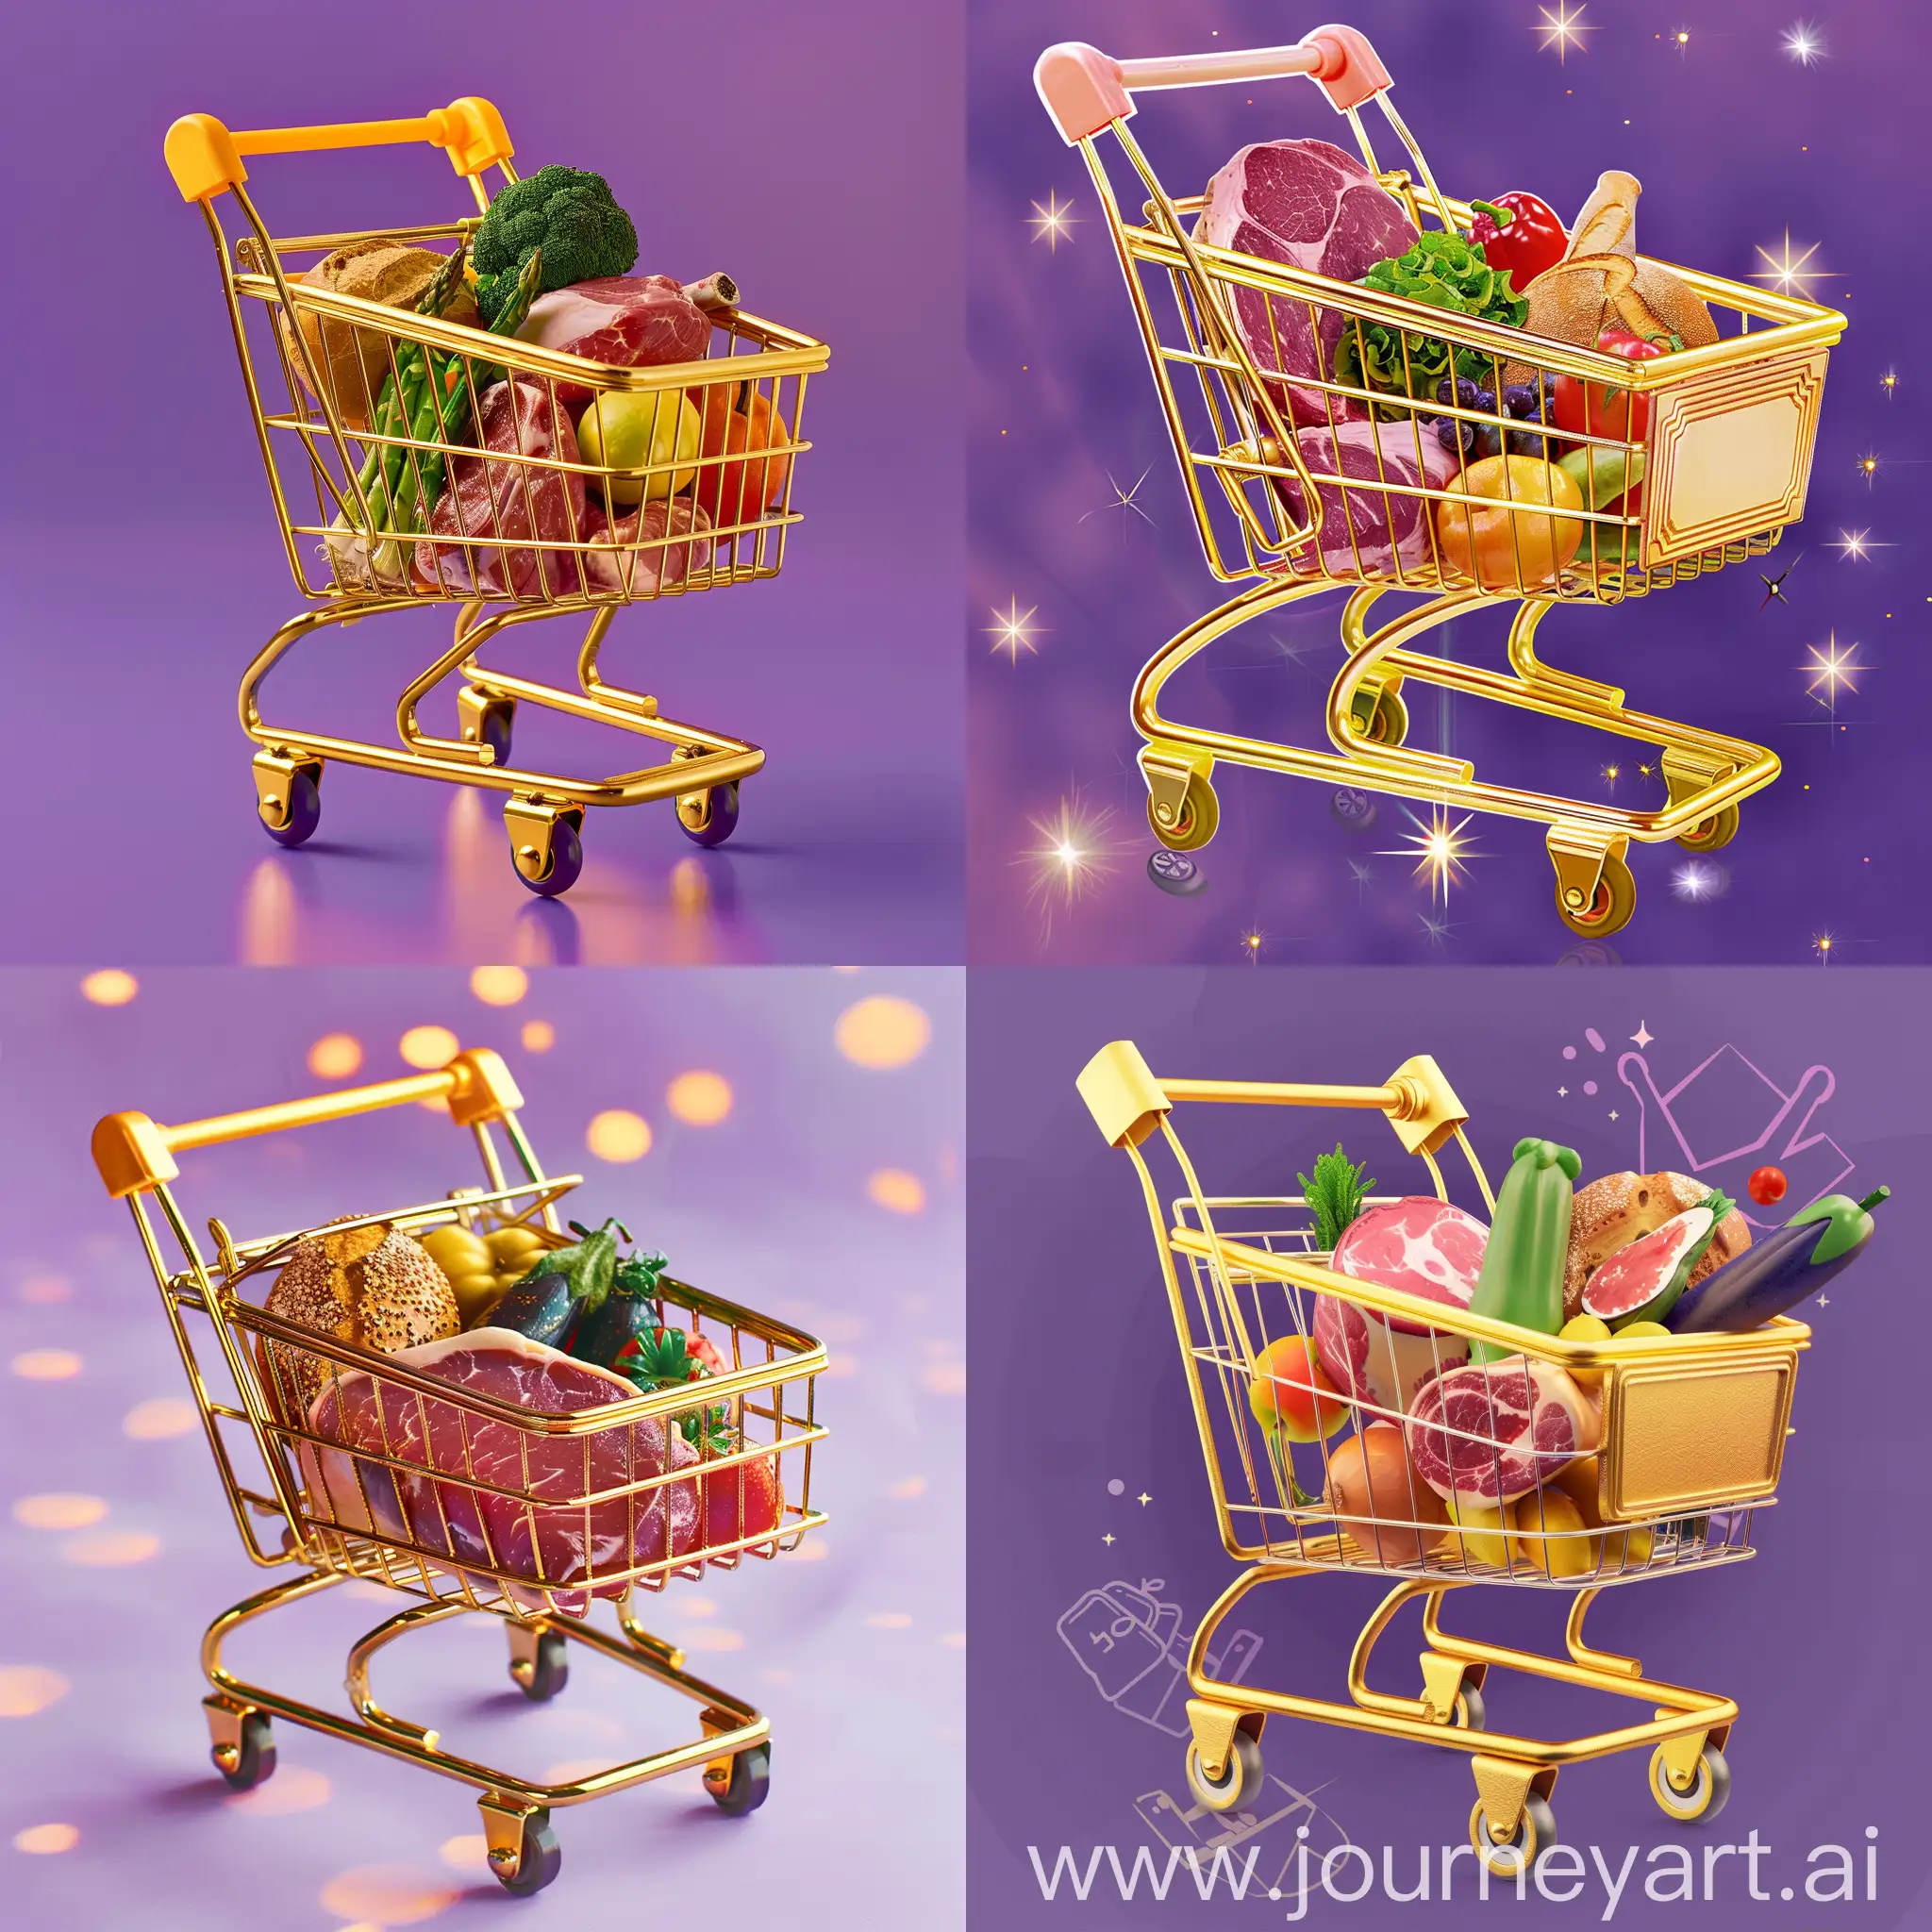 Make a beautiful golden magic wheeled shopping cart with a purple background that contains meat, fruit, vegetables, and bread inside the shopping cart.
